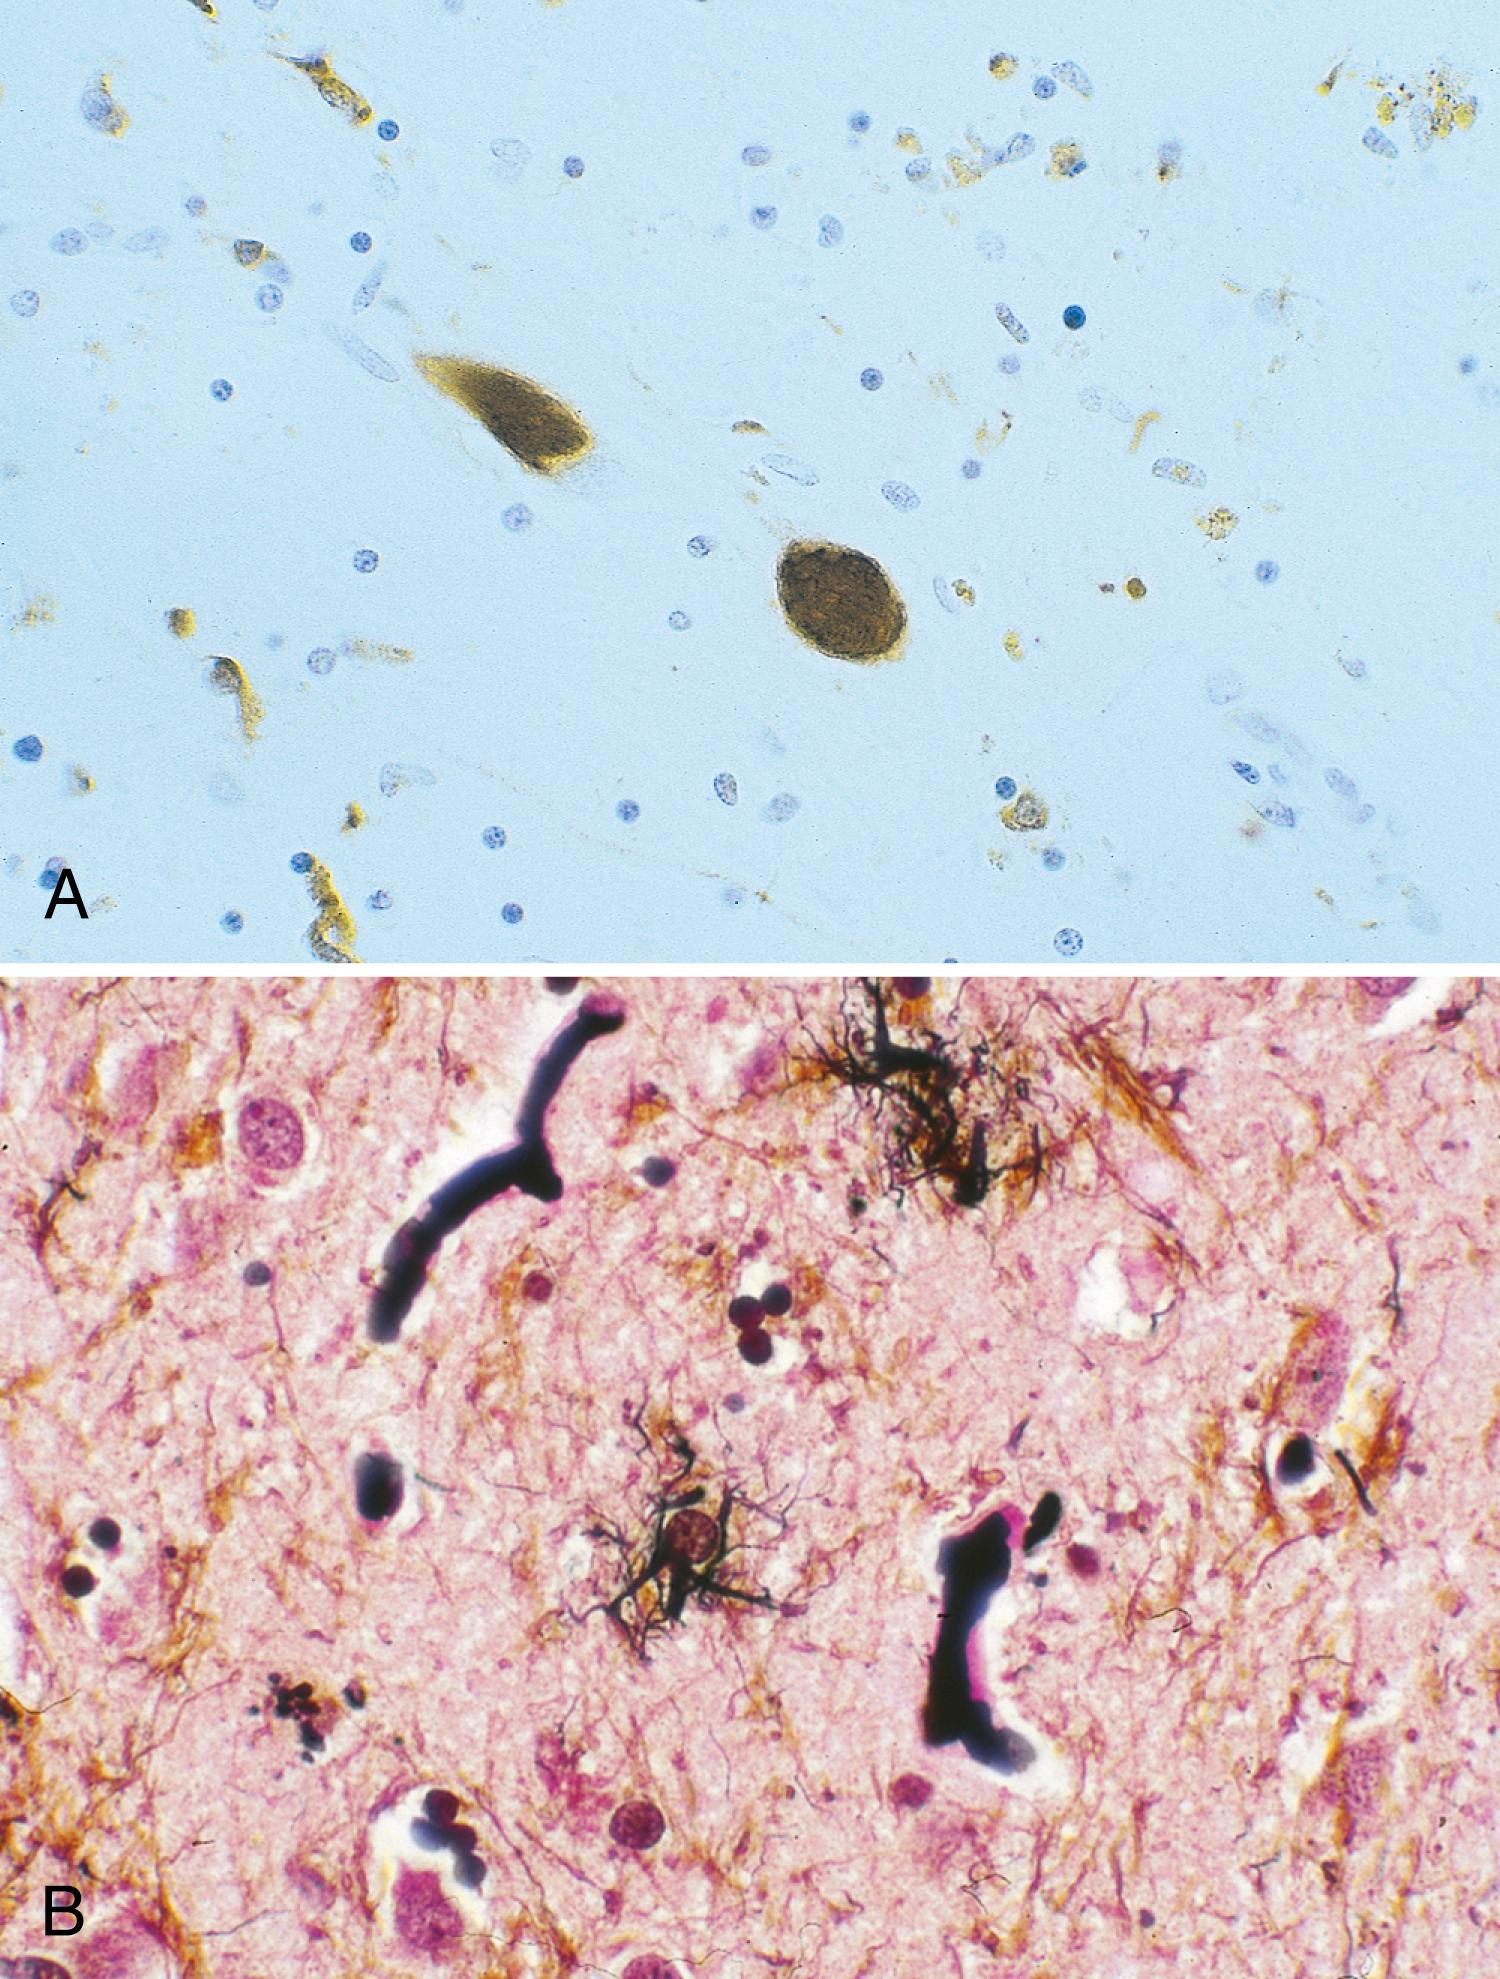 Fig. 96.13, Globose neurofibrillary tangle and tufted astrocytes in progressive supranuclear palsy (PSP). A, Tau-immunostained globose neurofibrillary tangles in neurons of globus pallidus. B, Gallyas silver-stained tufted astrocytes in globus pallidus of patient with PSP.